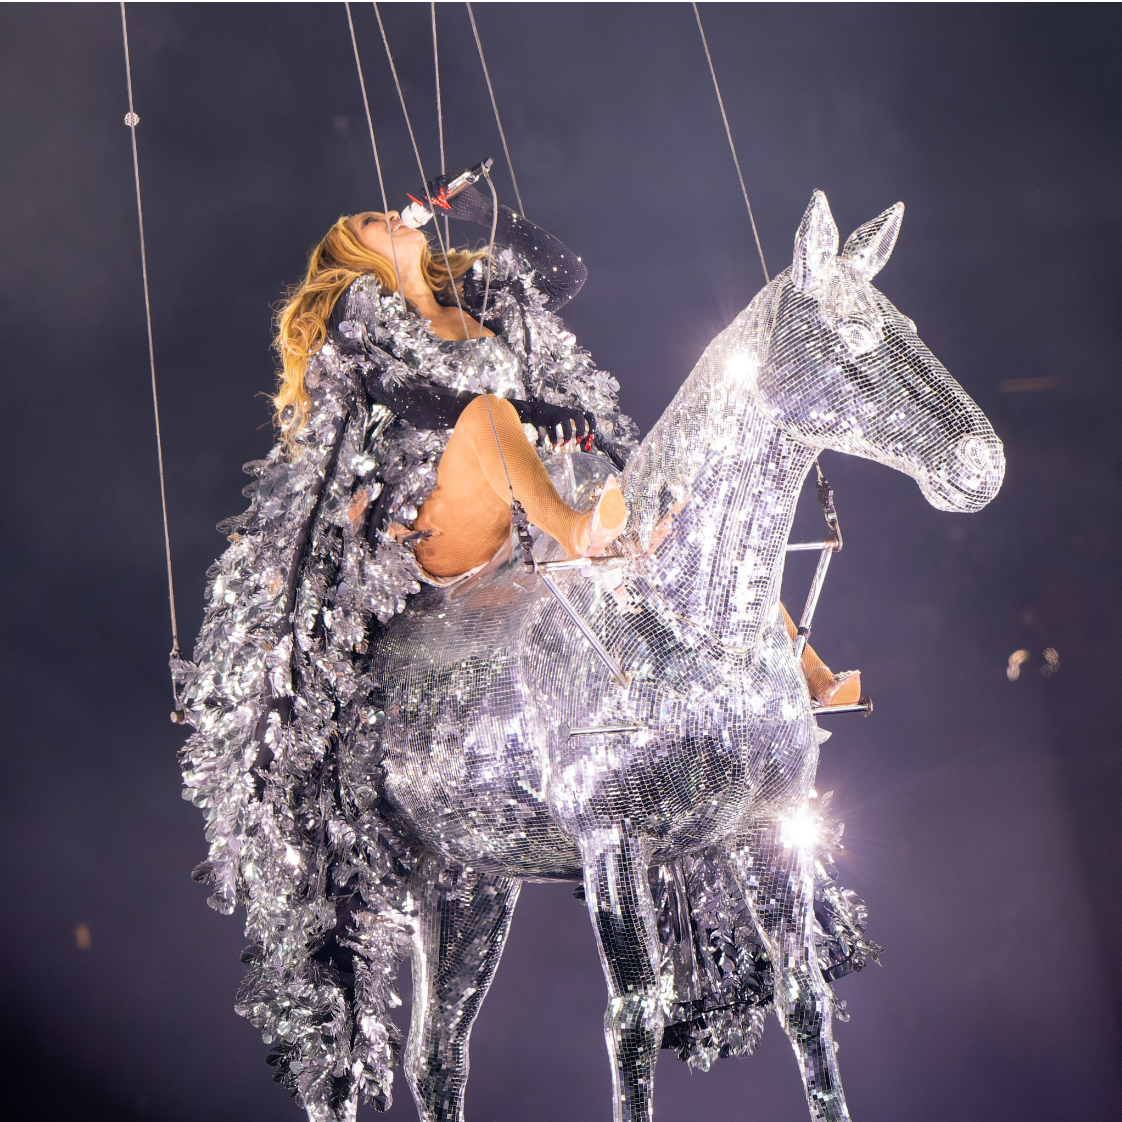 Beyonc%C3%A9s+iconic+holographic+horse%2C+Reneign%2C+from+the+Renaissance+album+cover.+Courtesy+of+Wikimedia+Commons